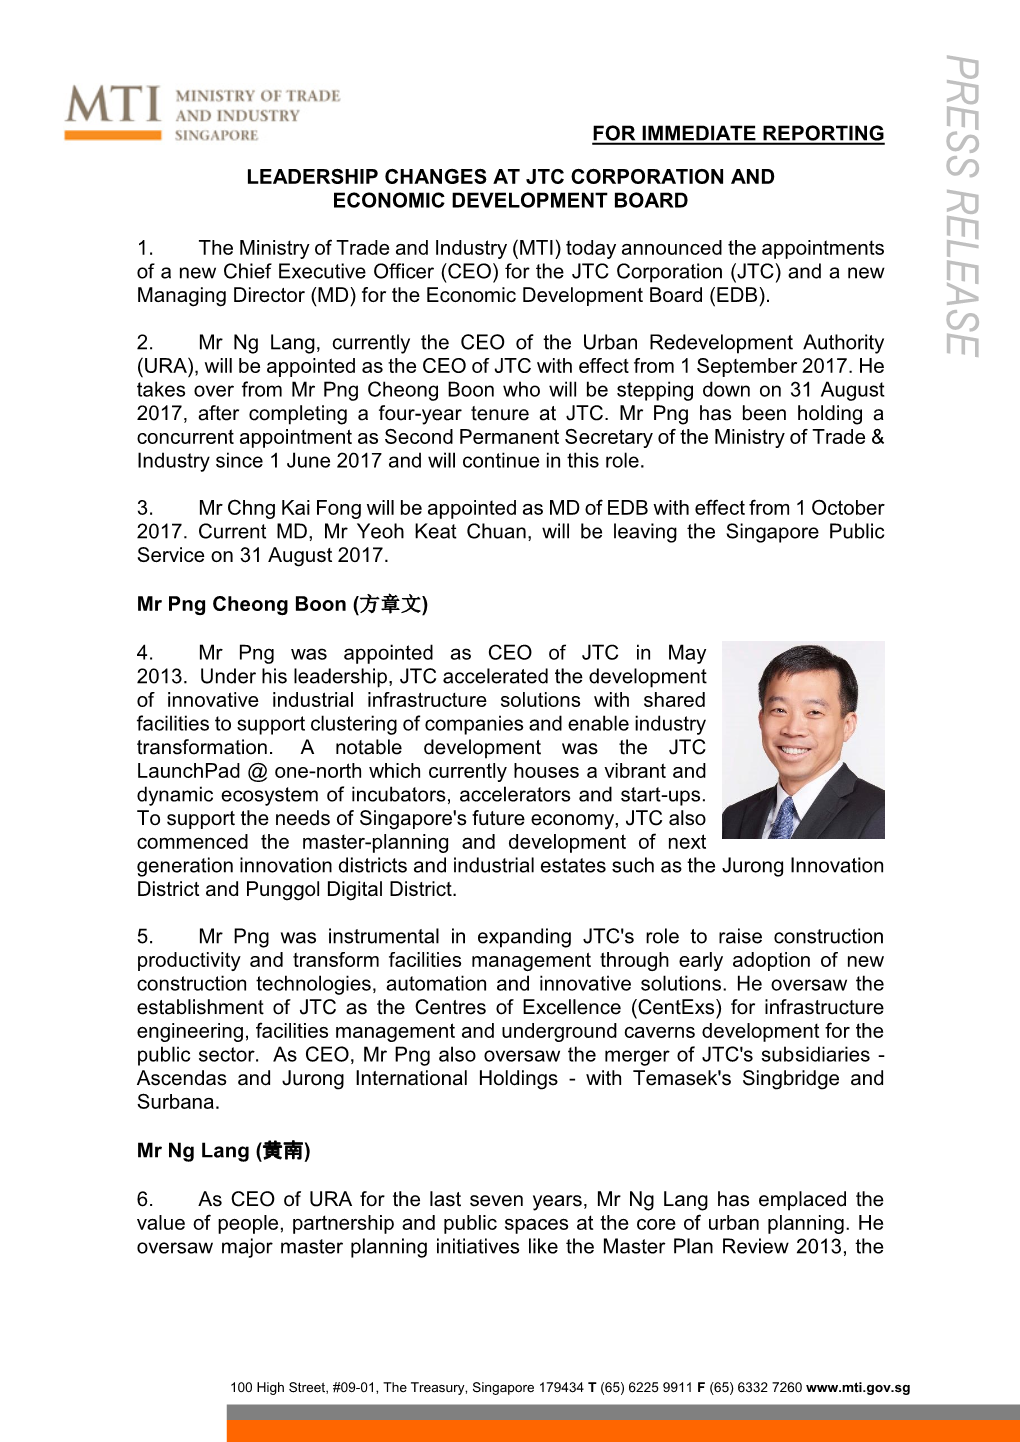 Press Release on New CEO for JTC and MD for EDB.Pdf